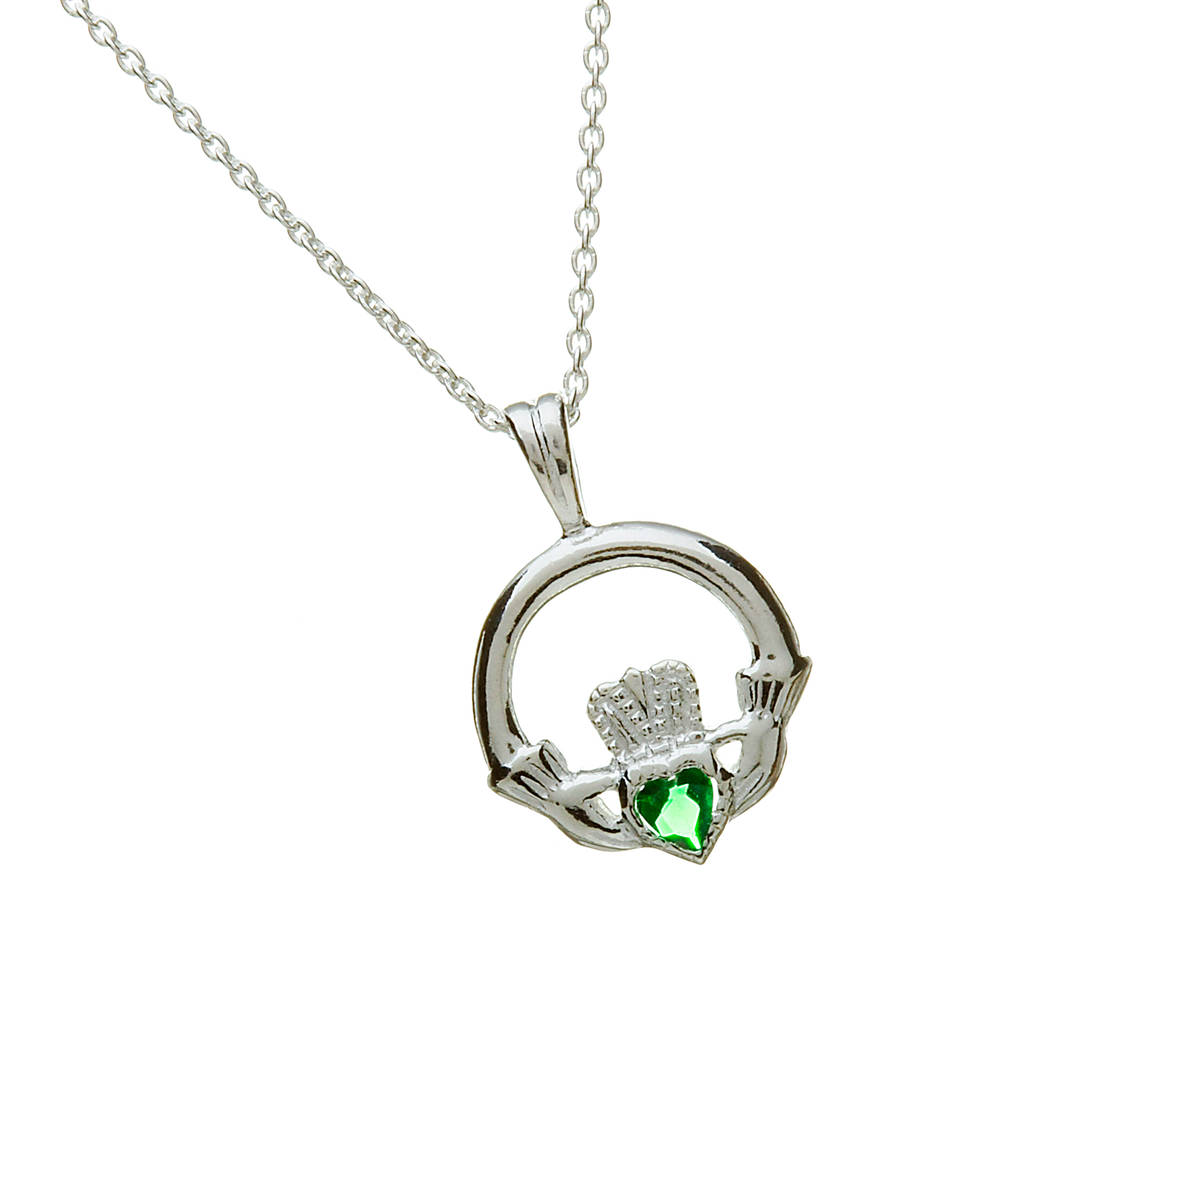 Silver Claddagh Pendant With Green Agate Heart
